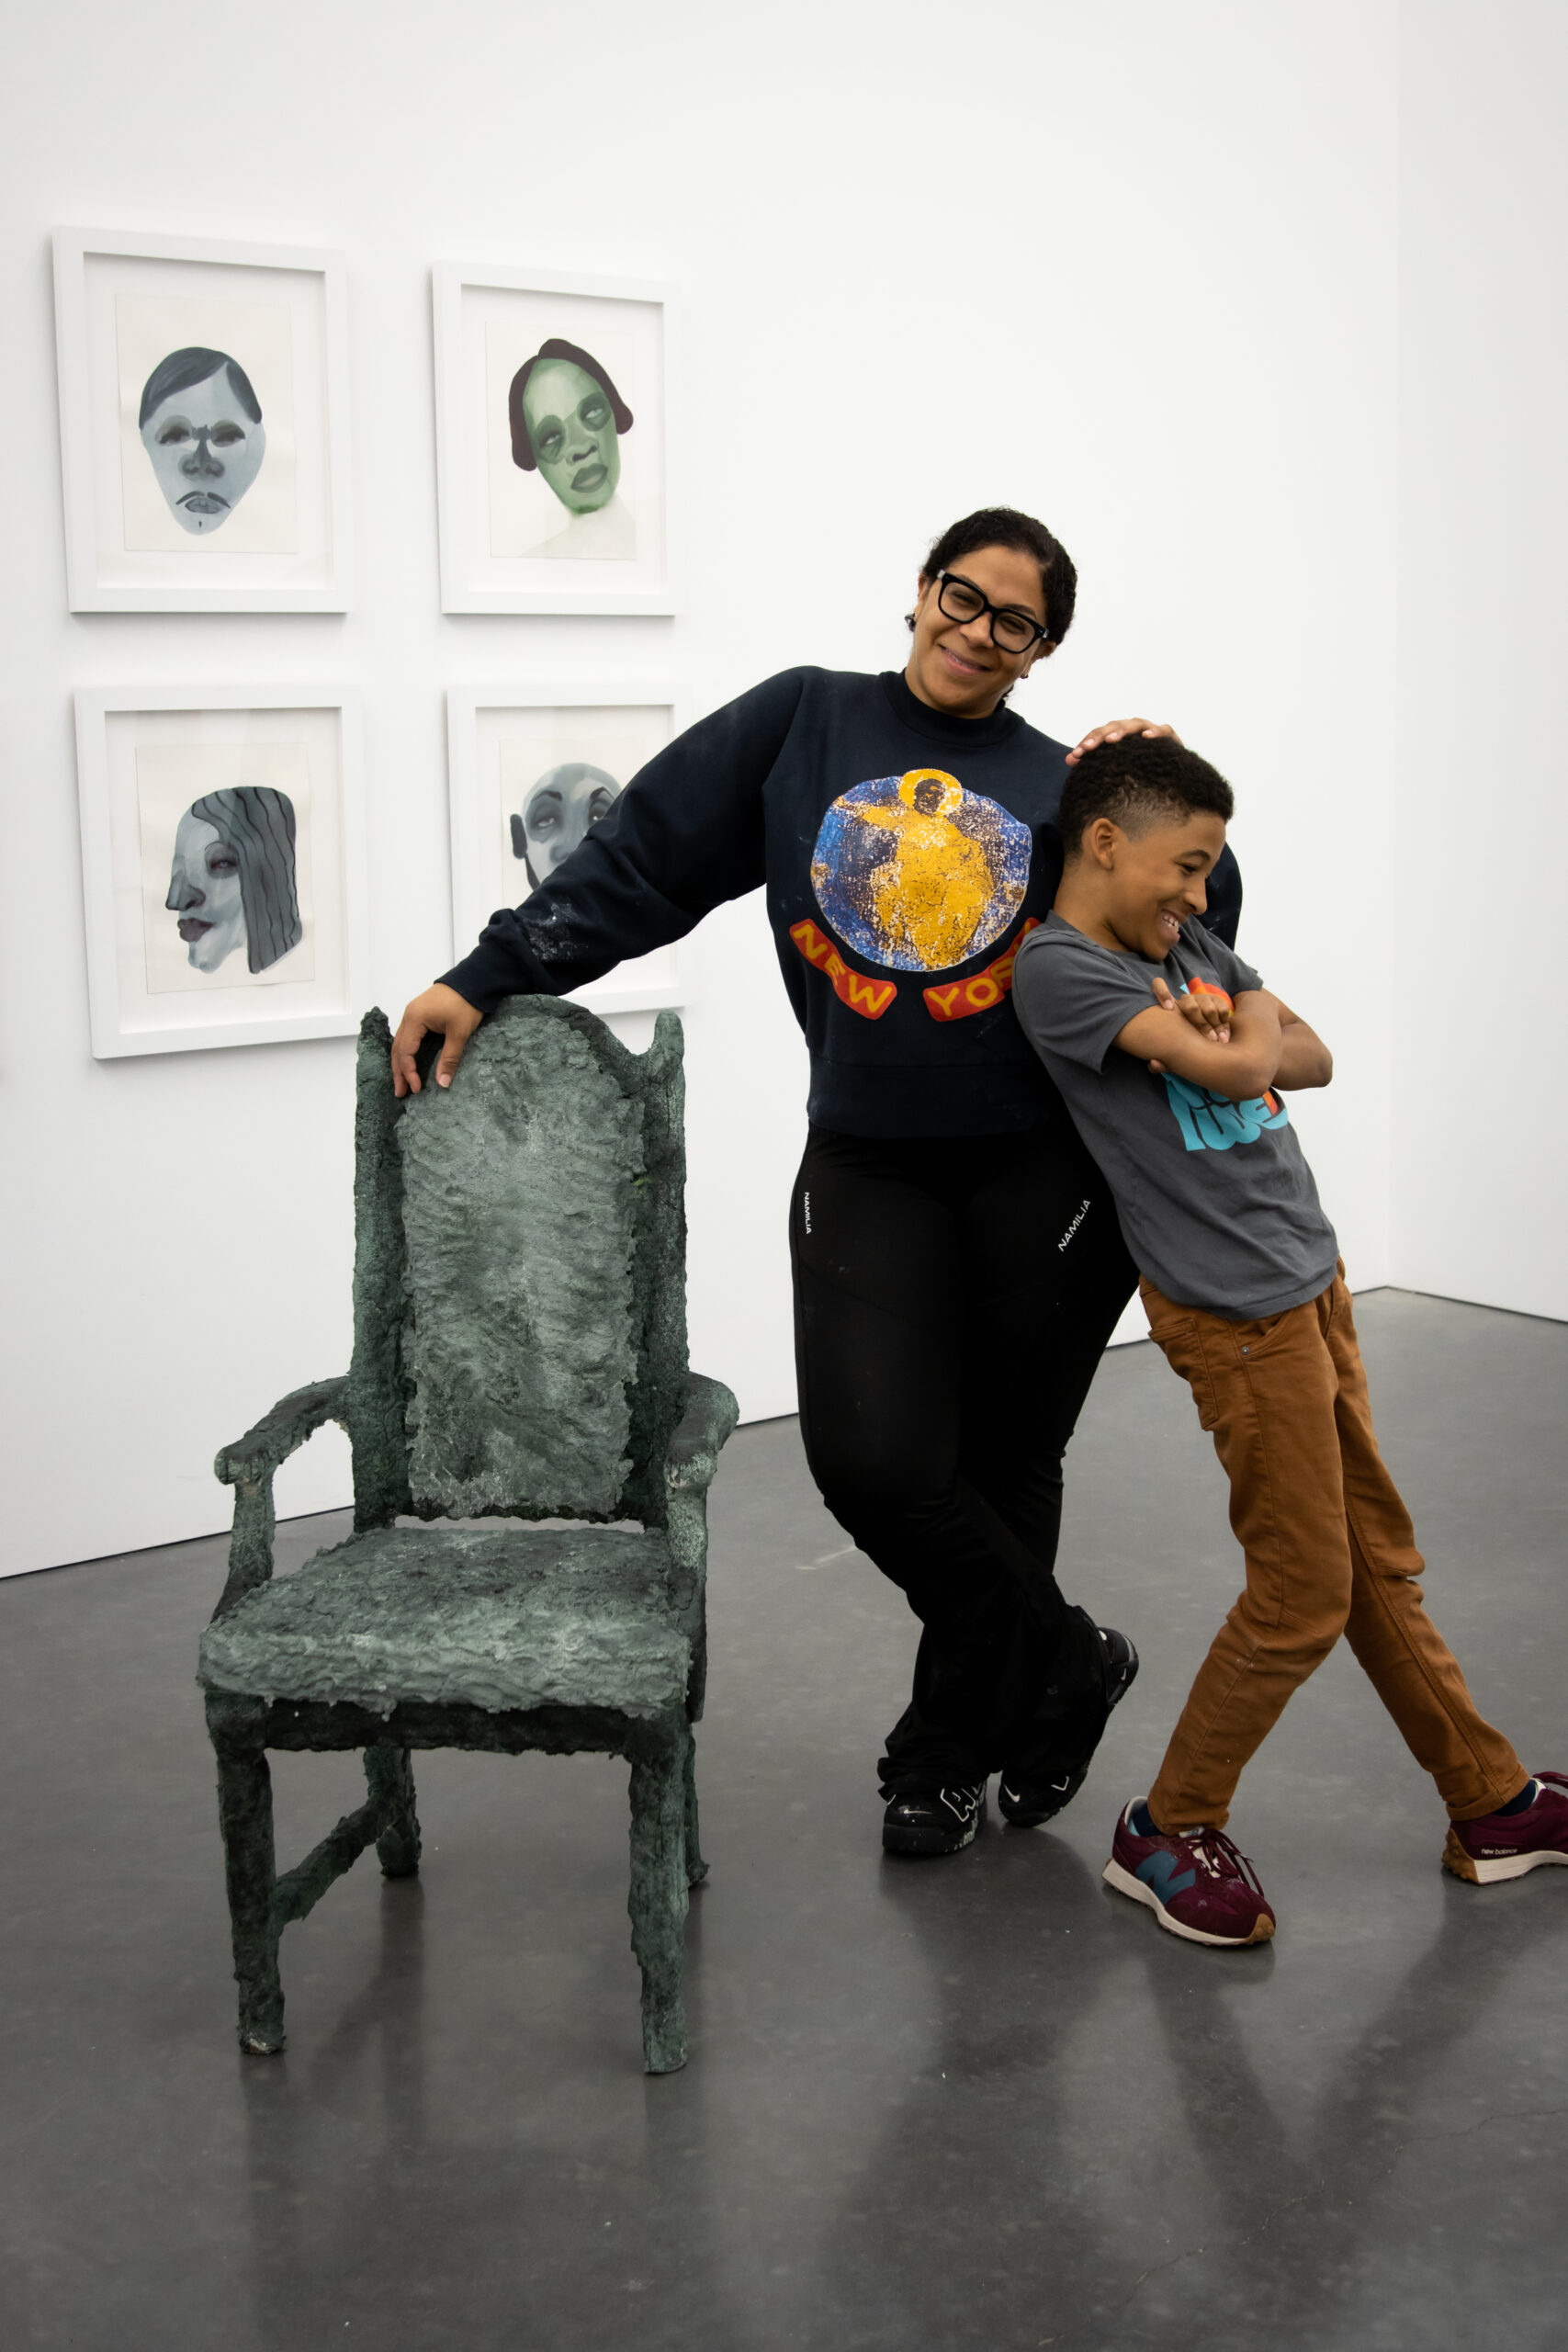 February James with her son, Greyson, during the installation of her piece 